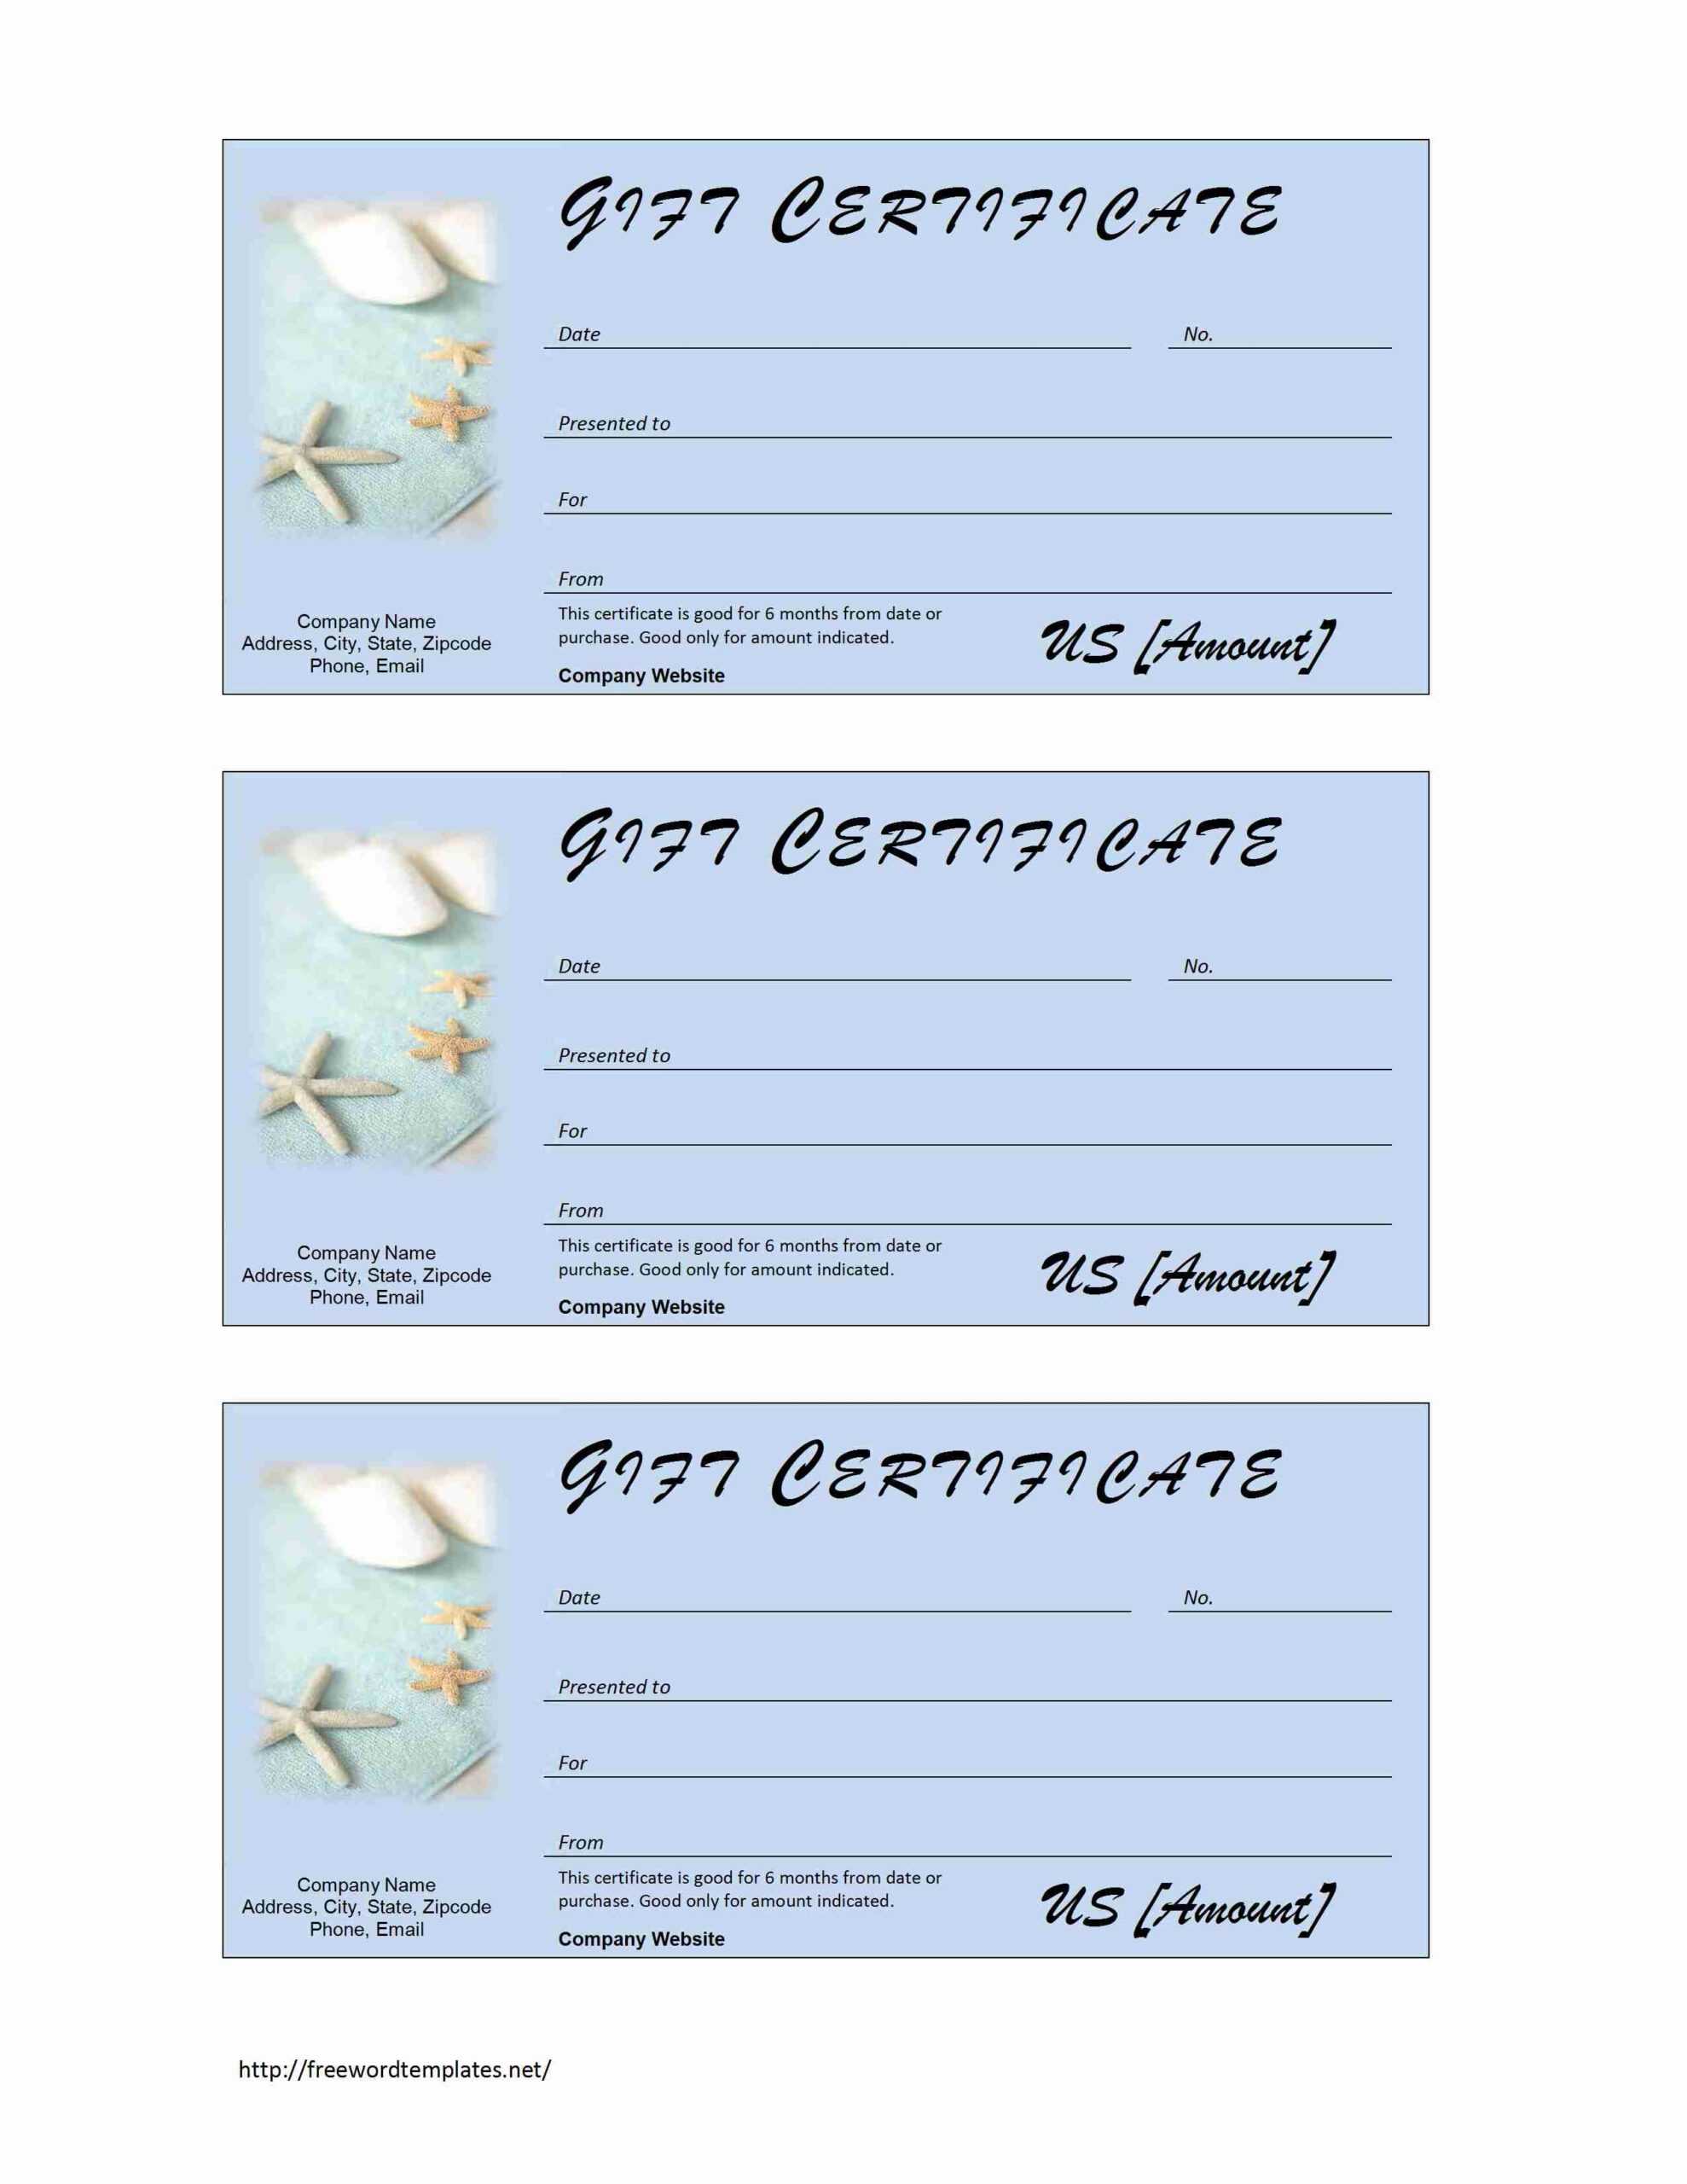 Free Printable Gift Certificates For Photography Business Intended For Massage Gift Certificate Template Free Printable